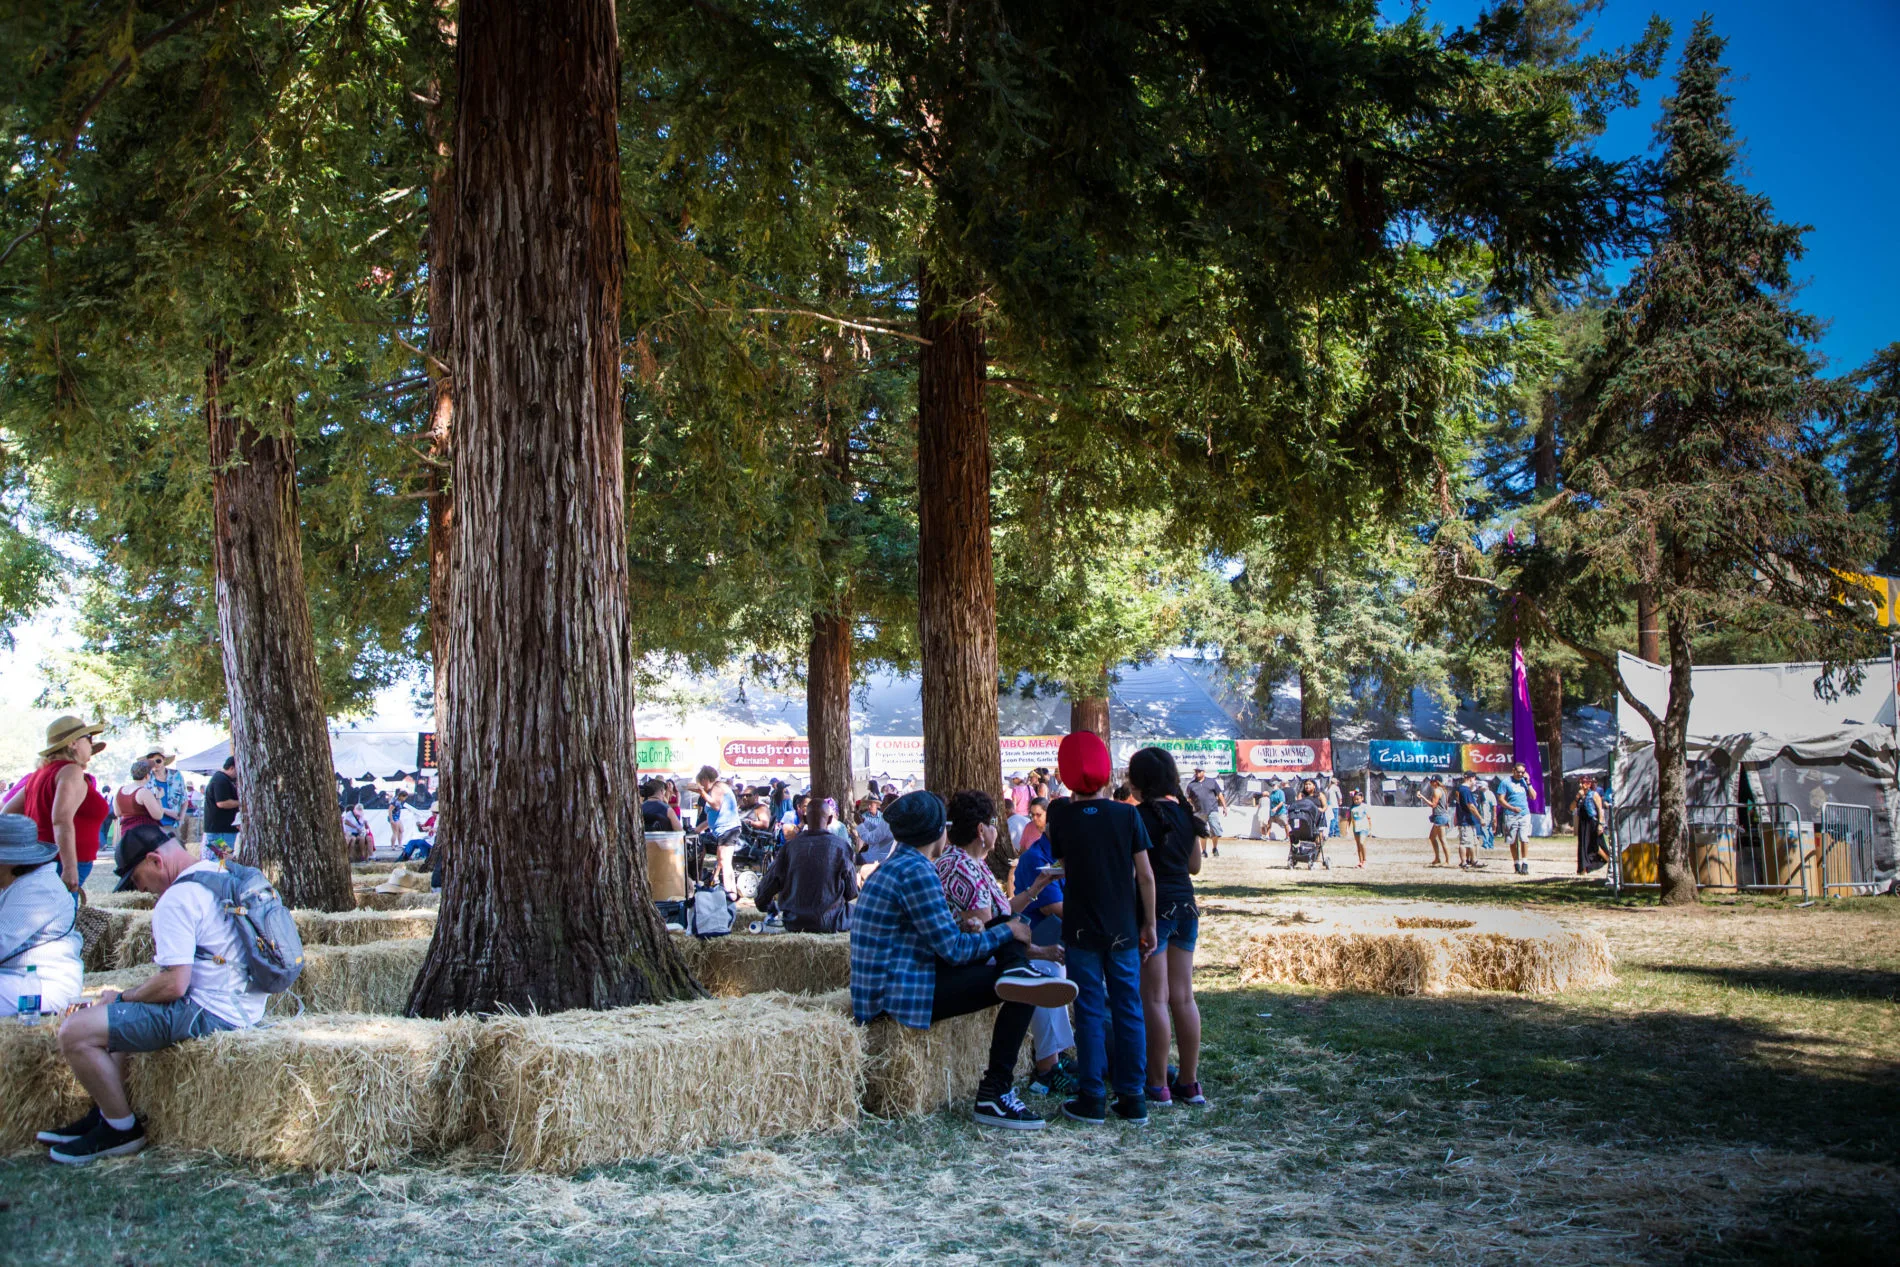 It's hot in California in summer, and luckily there are some trees with hay bales under them so you can get out of the heat.